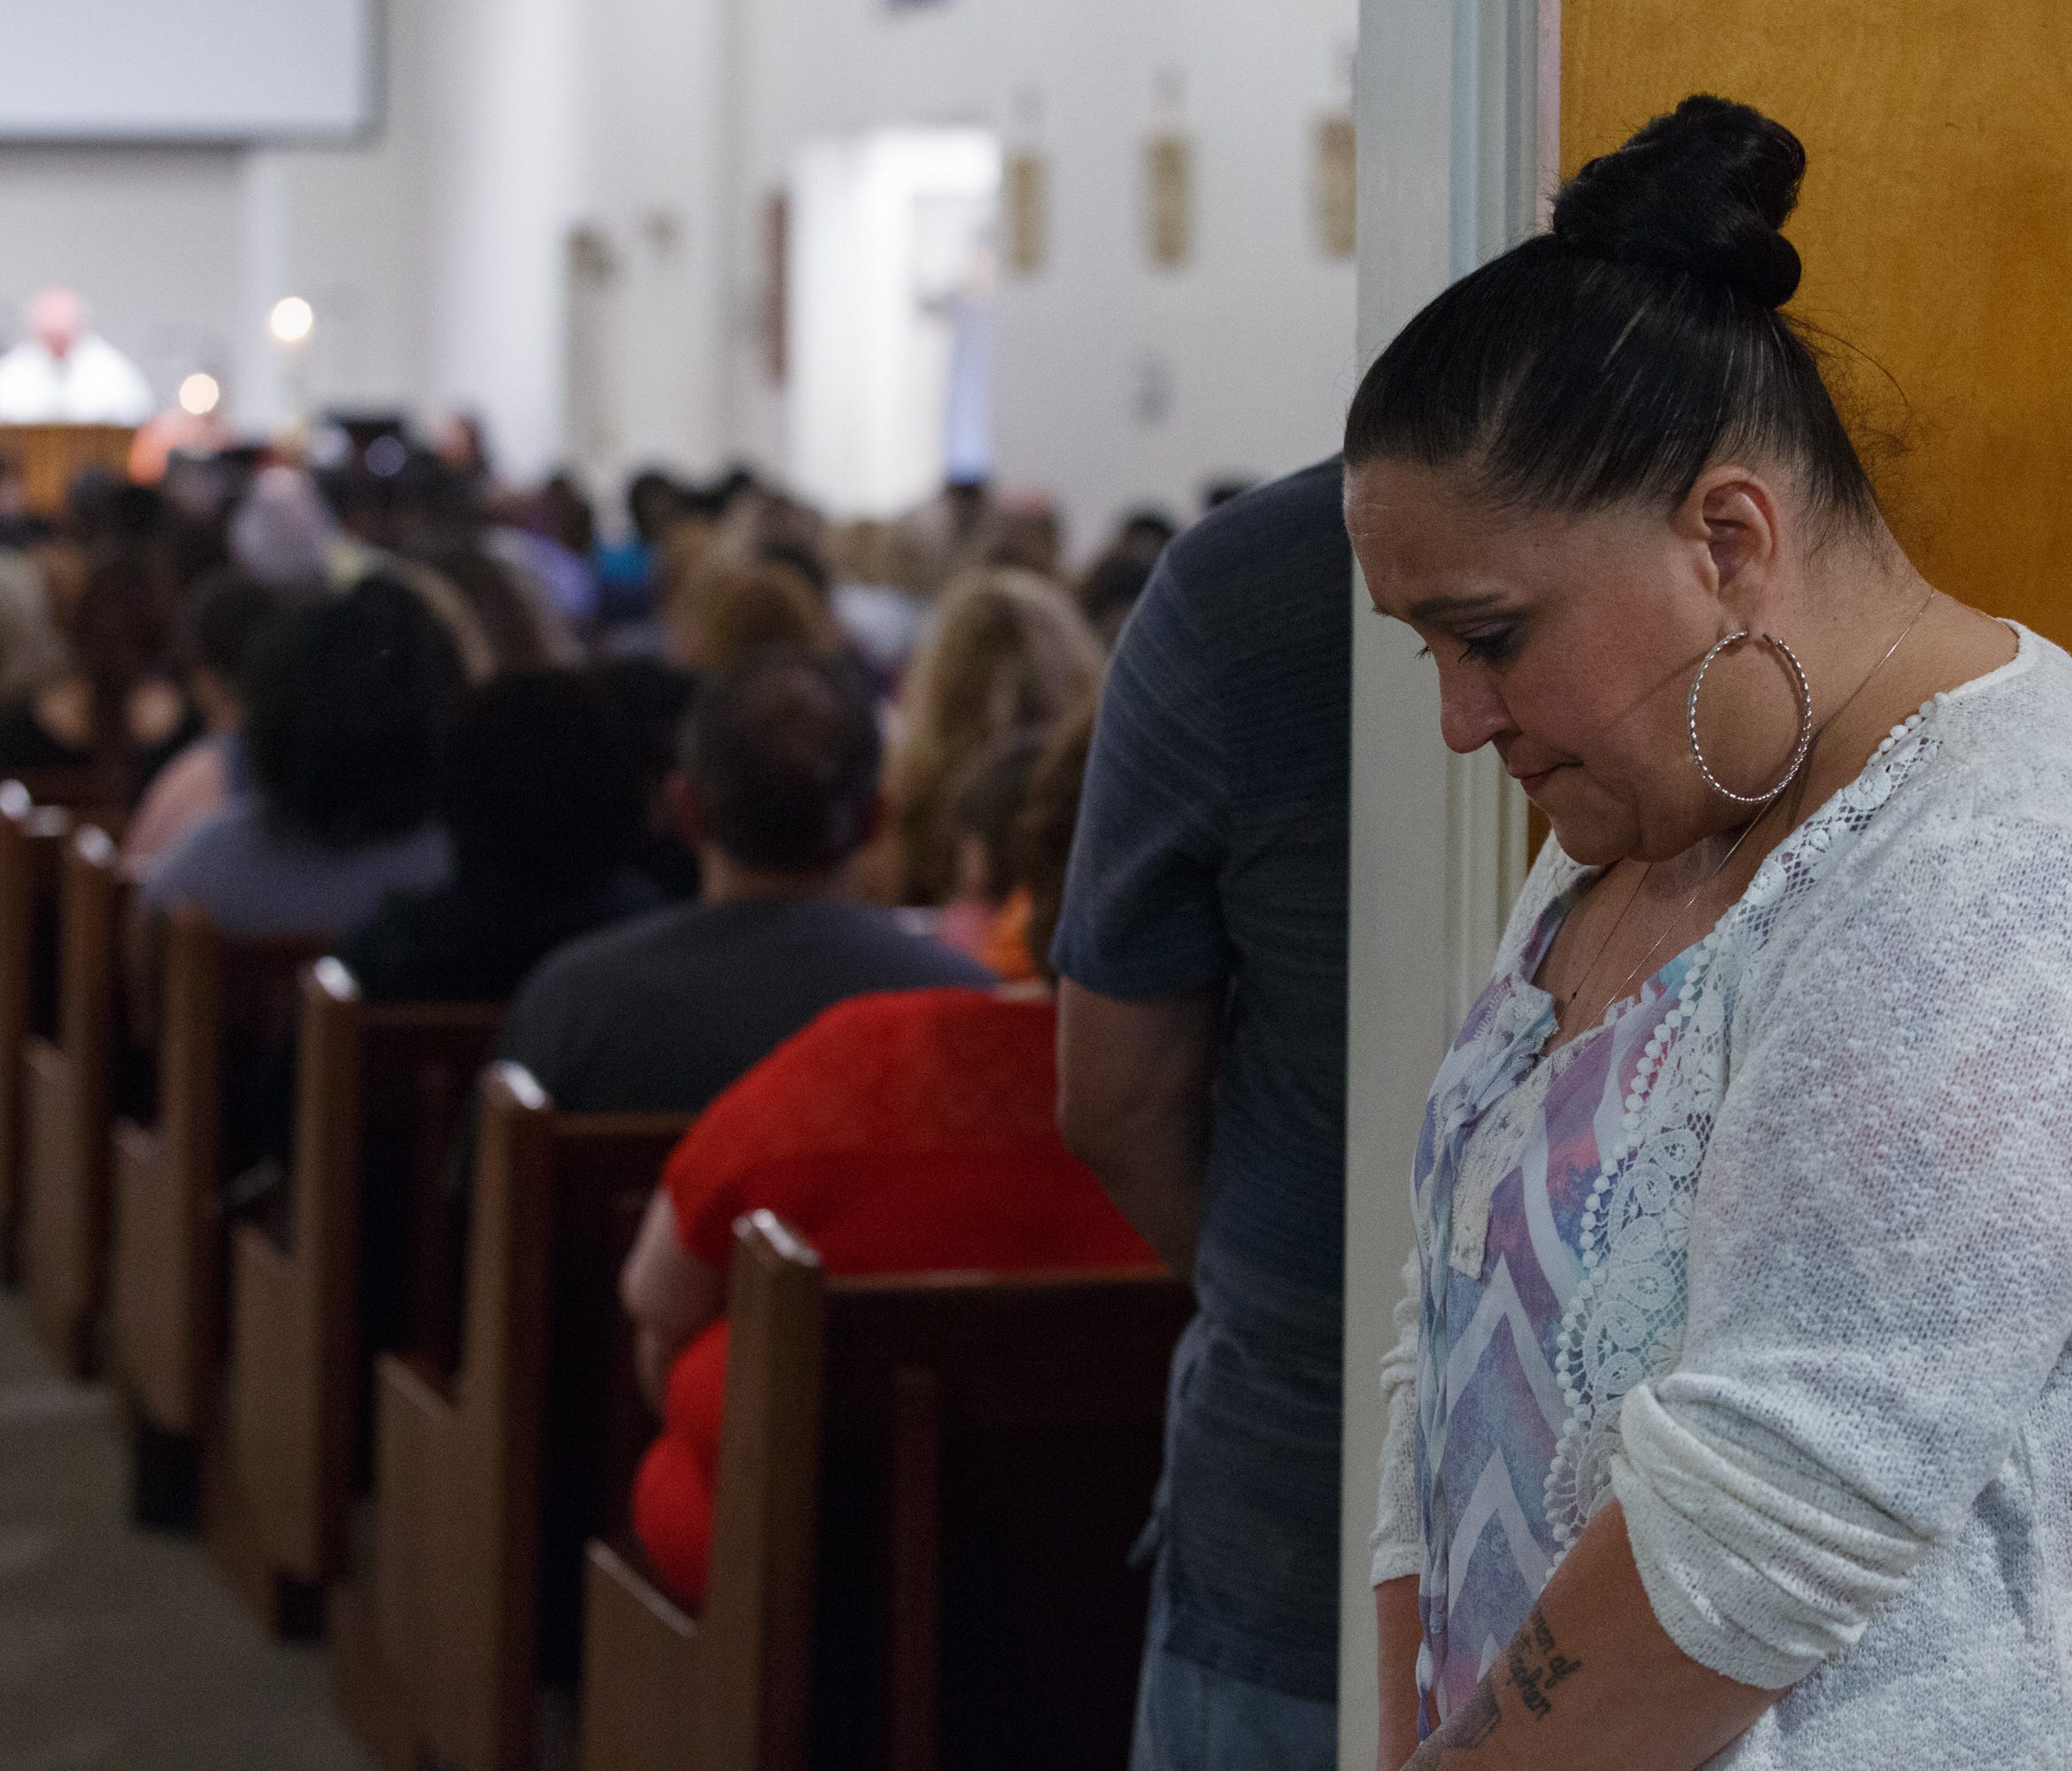 Suzanne Sullivan cries during a prayer service at Our Lady of the Assumption Church in San Bernardino, Calif., following a school shooting at North Park Elementary School which left one student and a teacher dead, Monday, April 10, 2017.